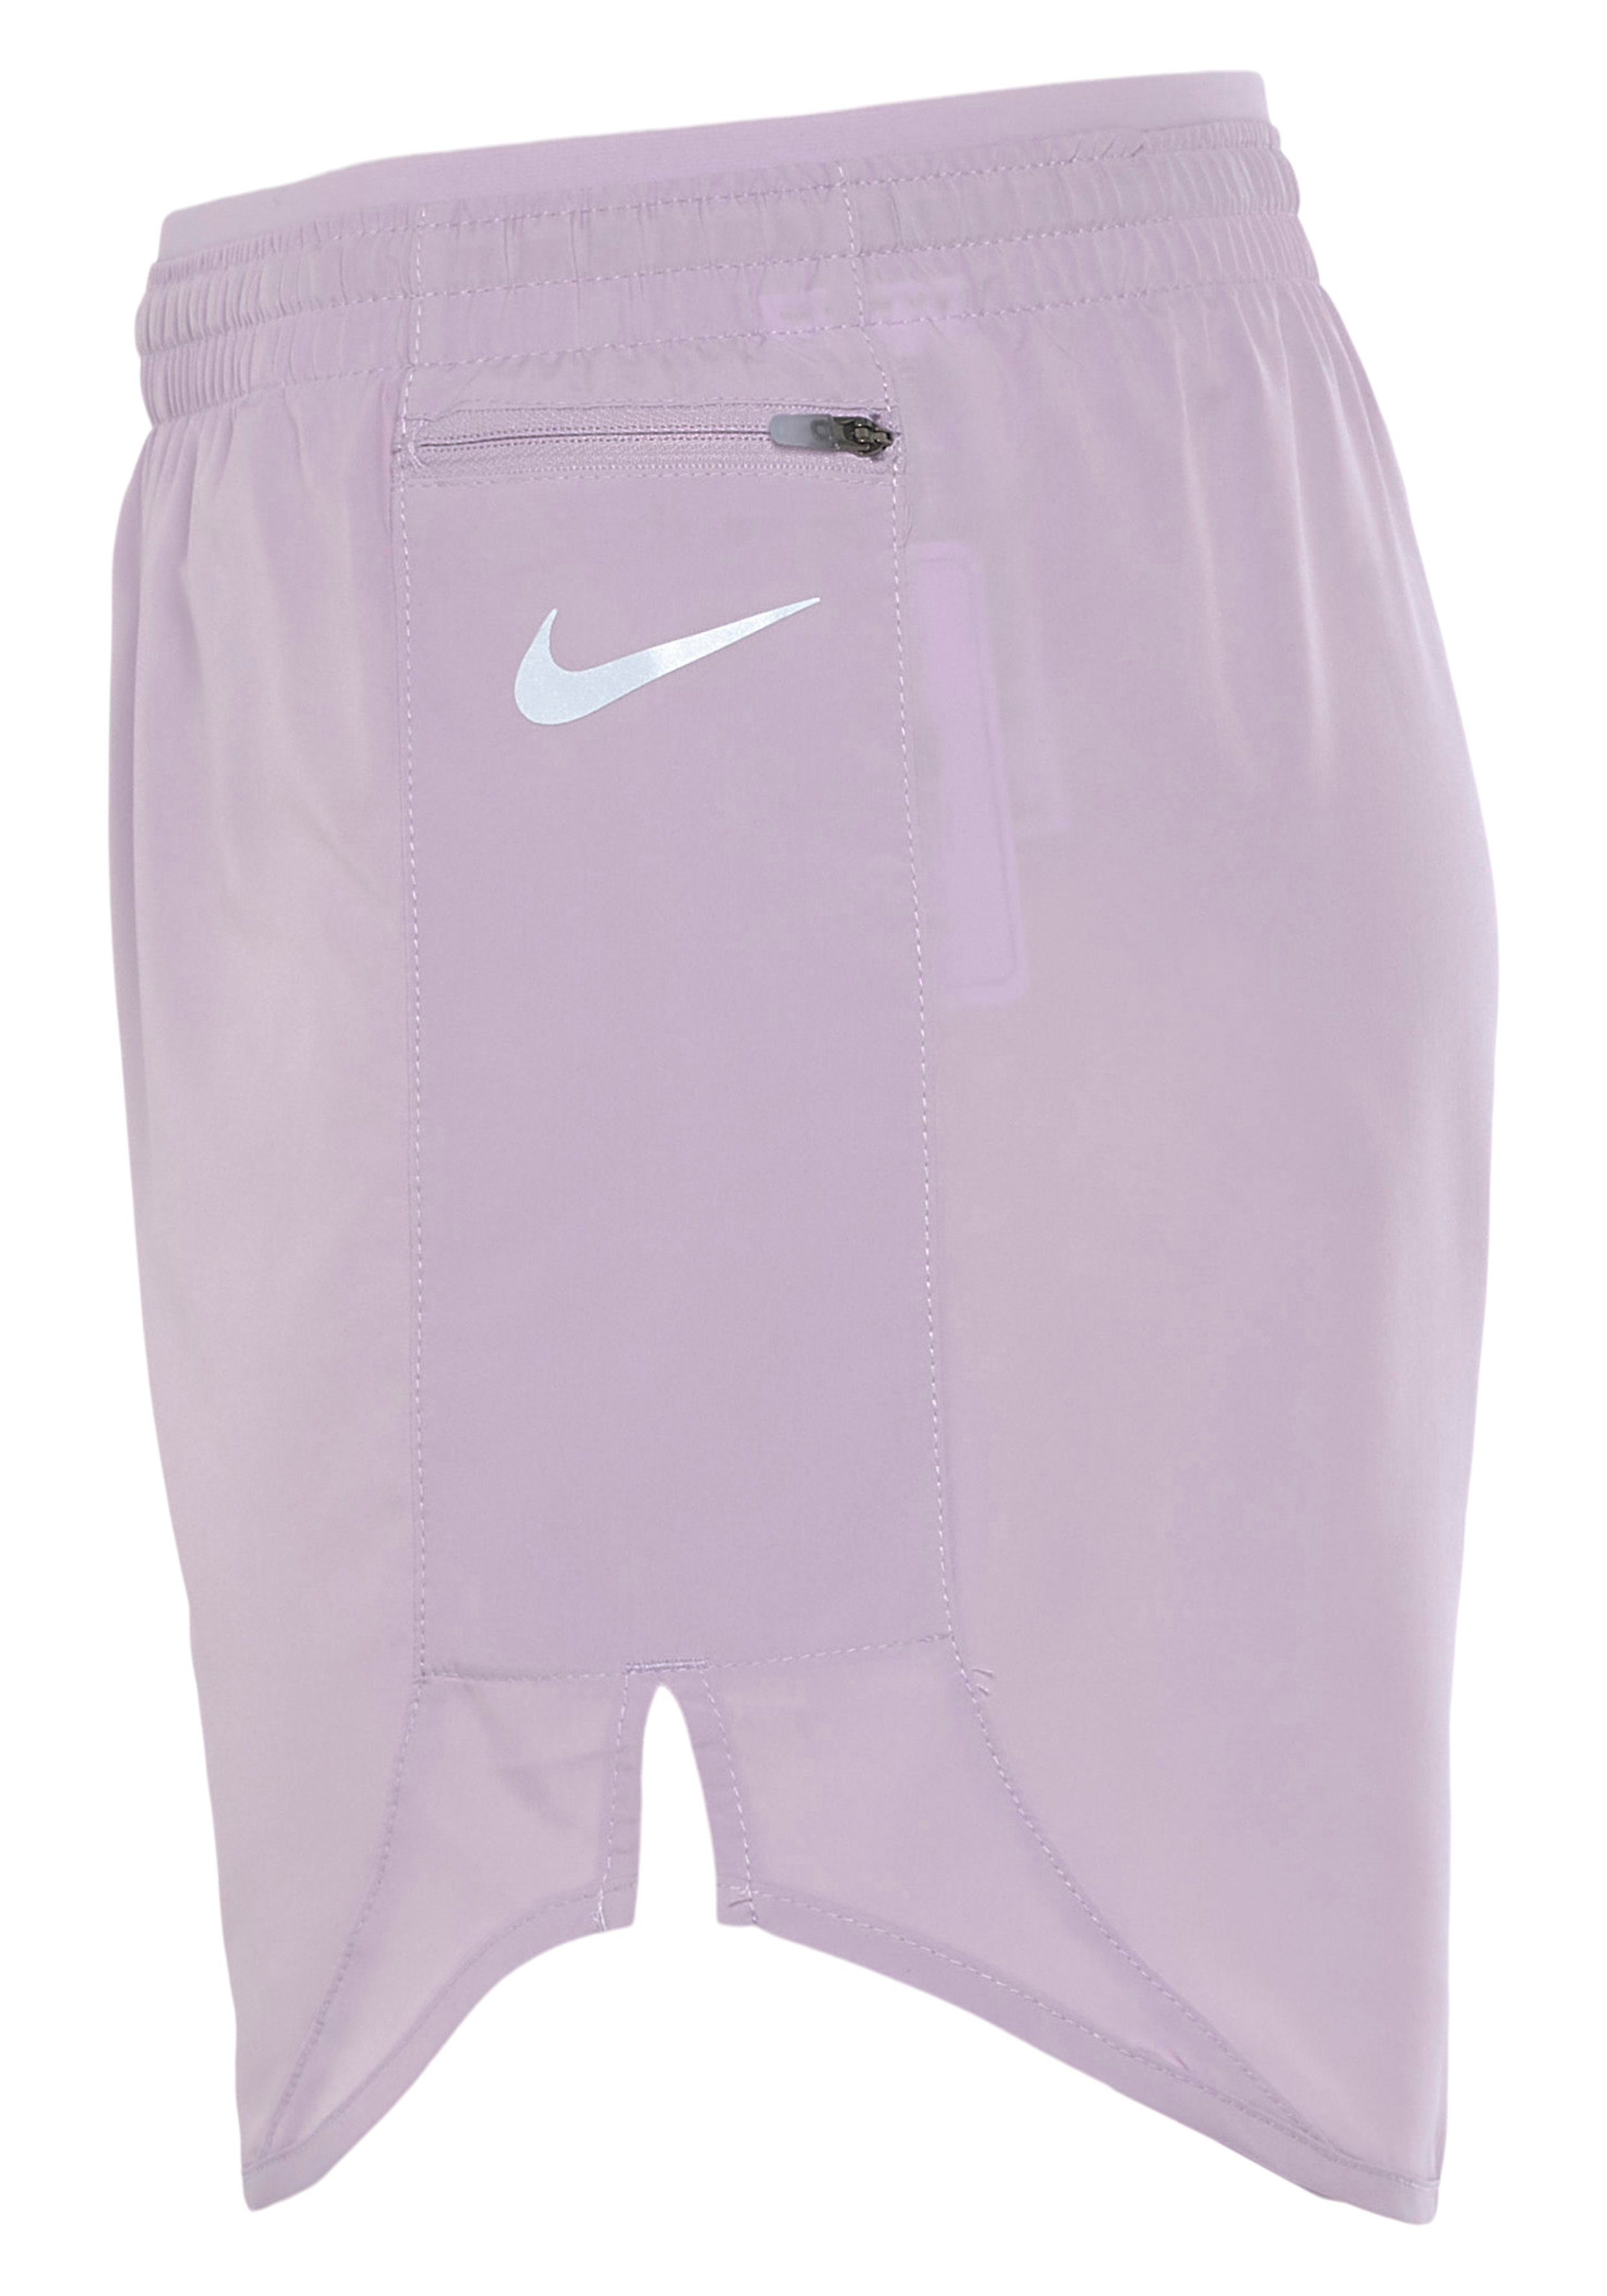 Women's Shorts Laufshorts DOLL/DOLL/REFLECTIVE Nike SILV Tempo Luxe Running